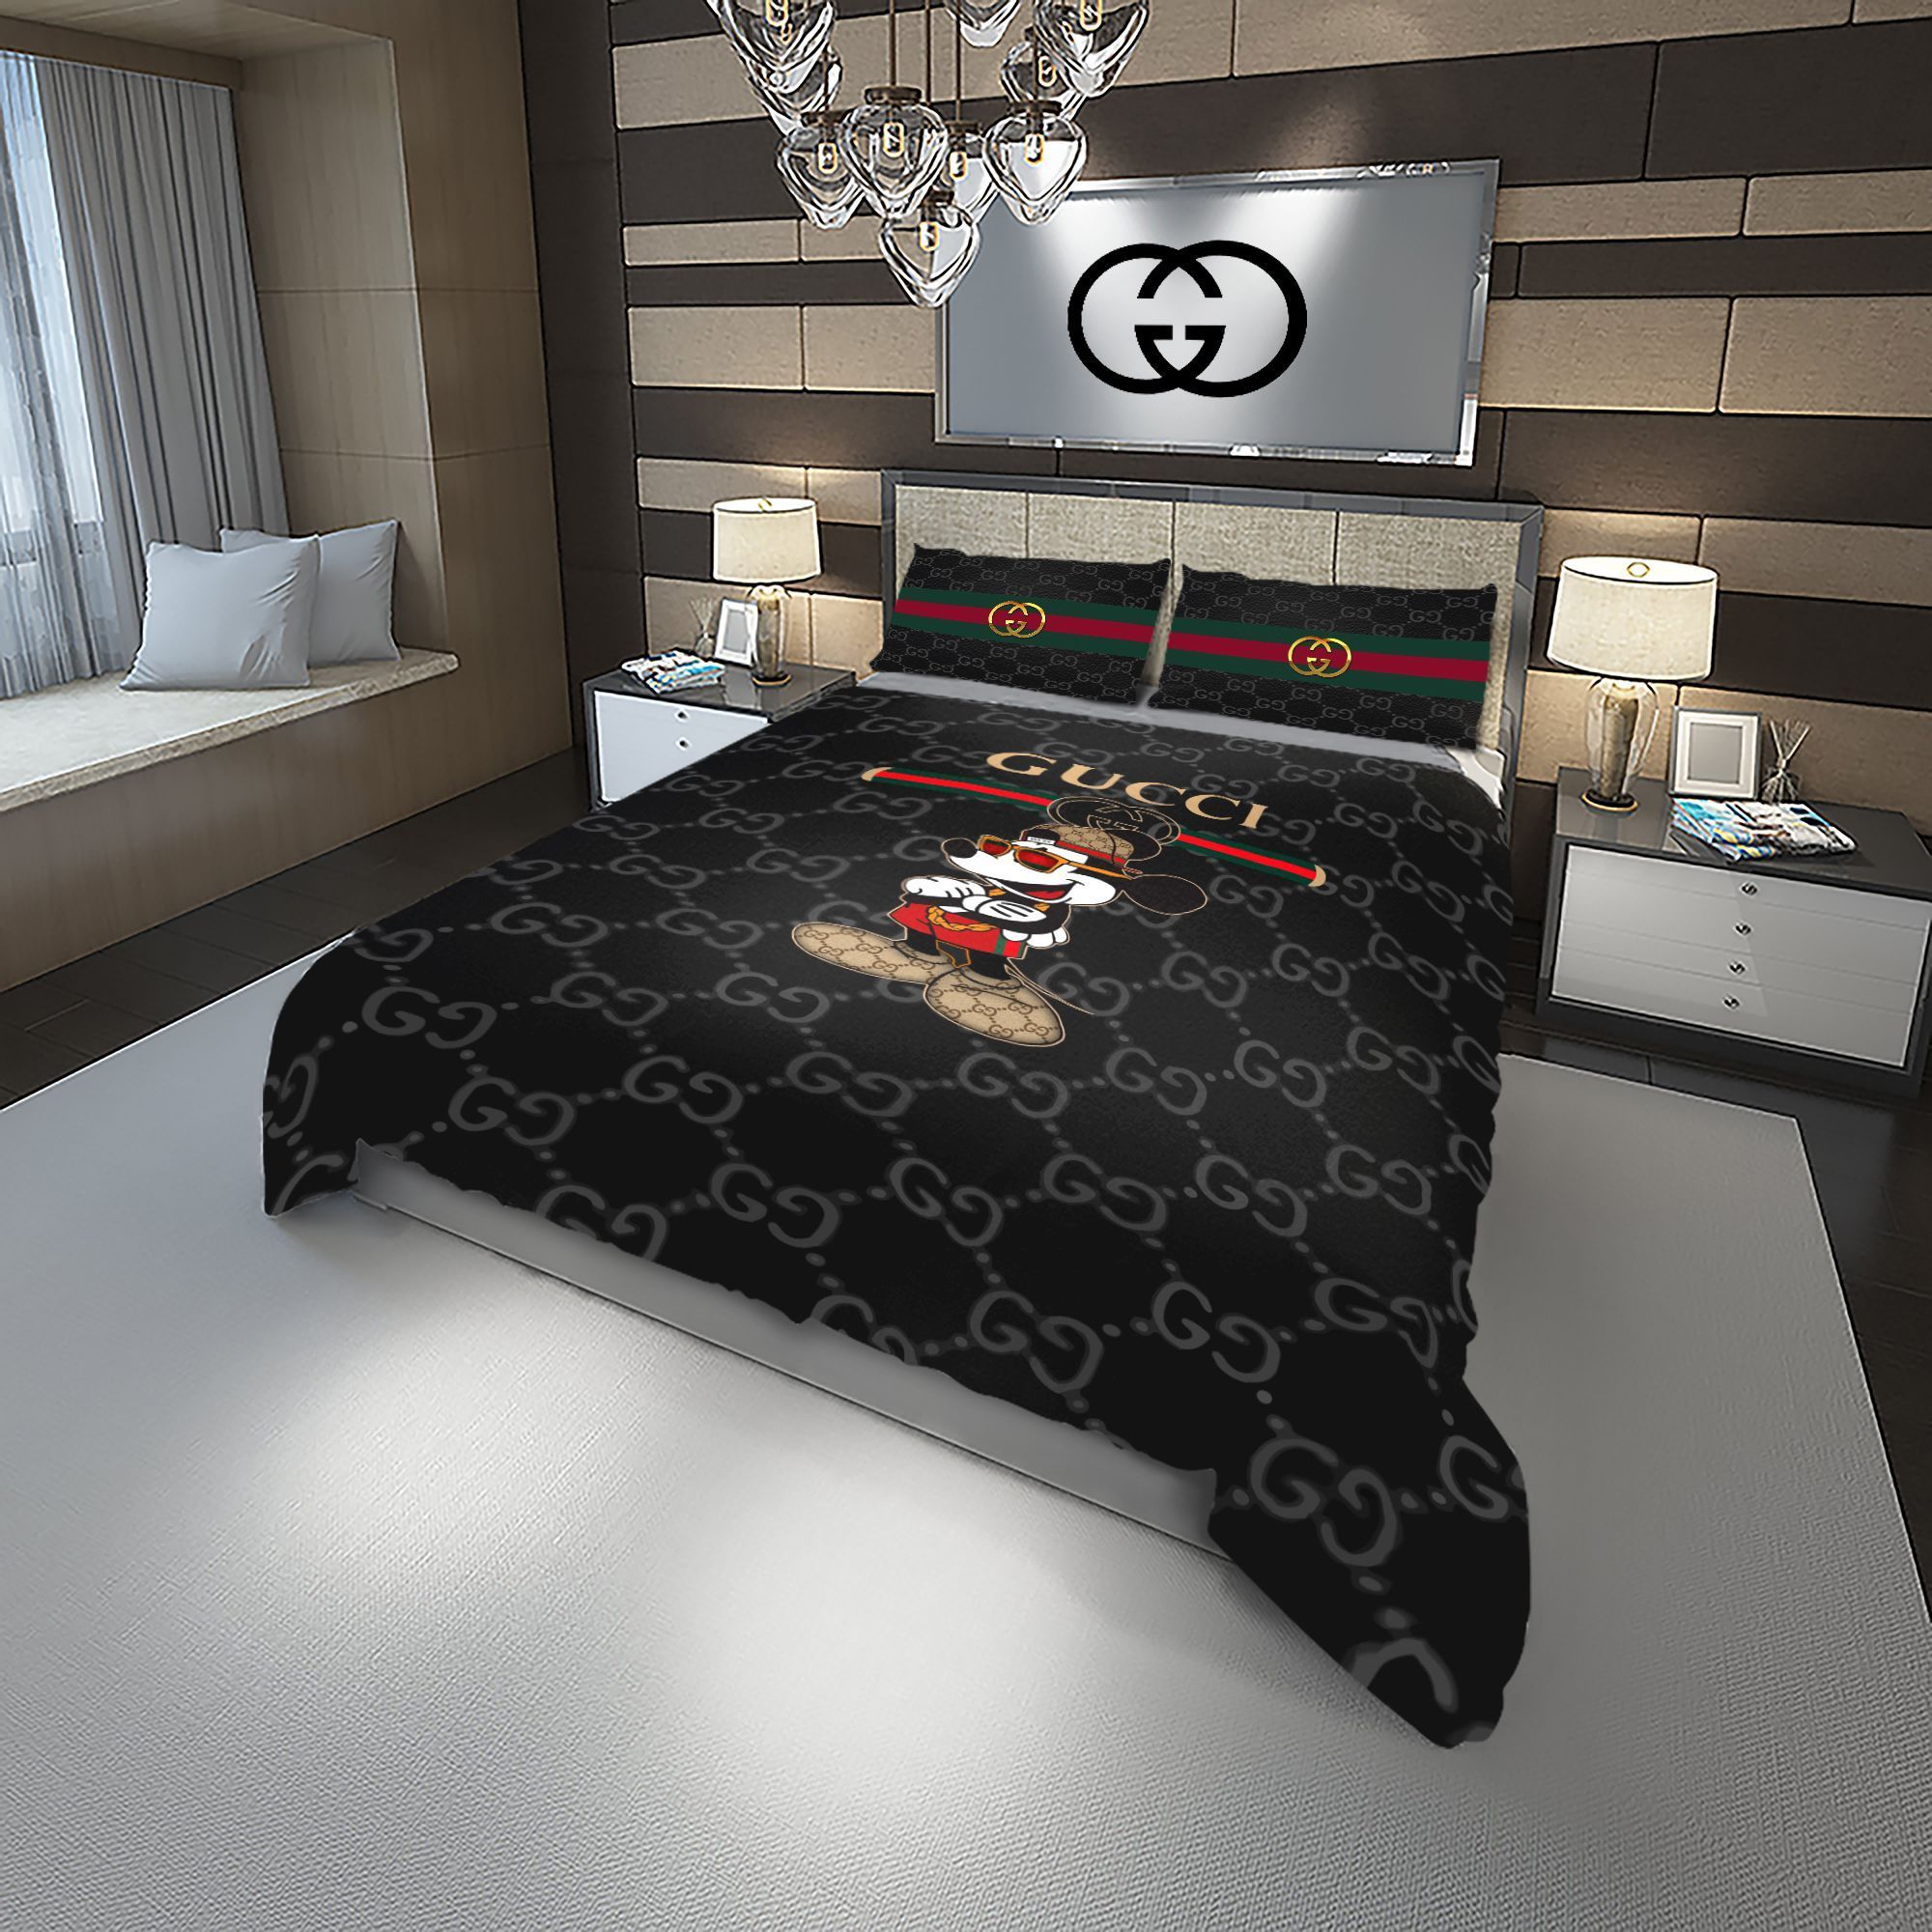 Let me show you about some luxury brand bedding set 2022 98